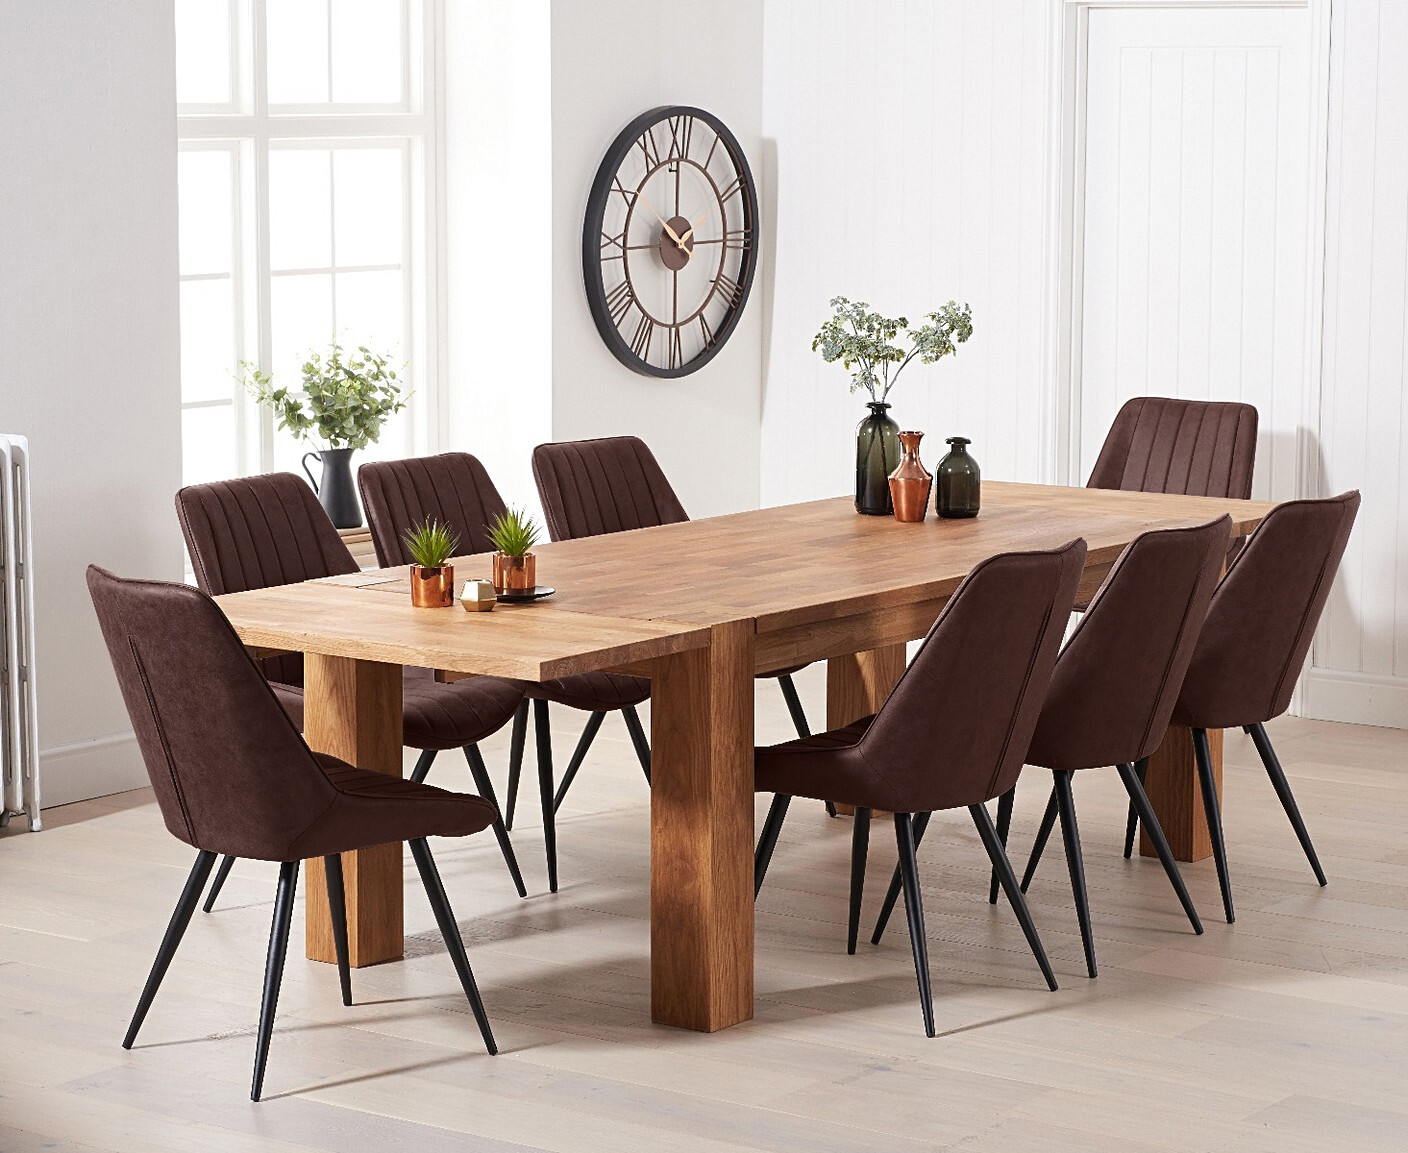 Photo 3 of Sheringham 200cm solid oak dining table with 8 brown brody chairs with sheringham oak extensions -pair-